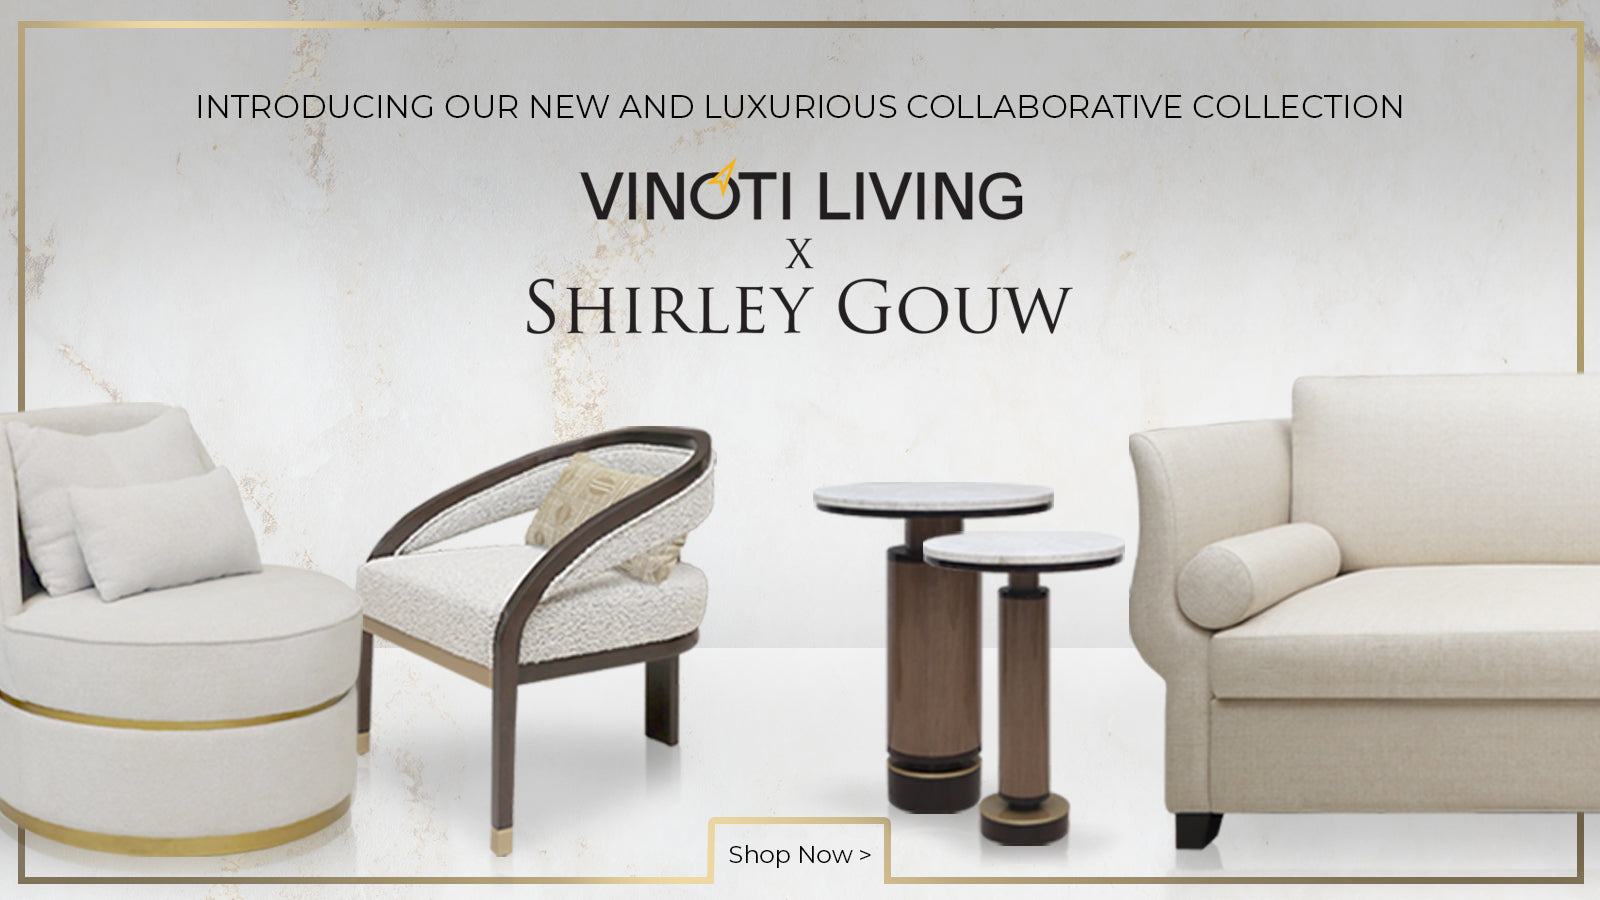 Quality Furniture & Accessories for Luxury Homes | Vinoti Living